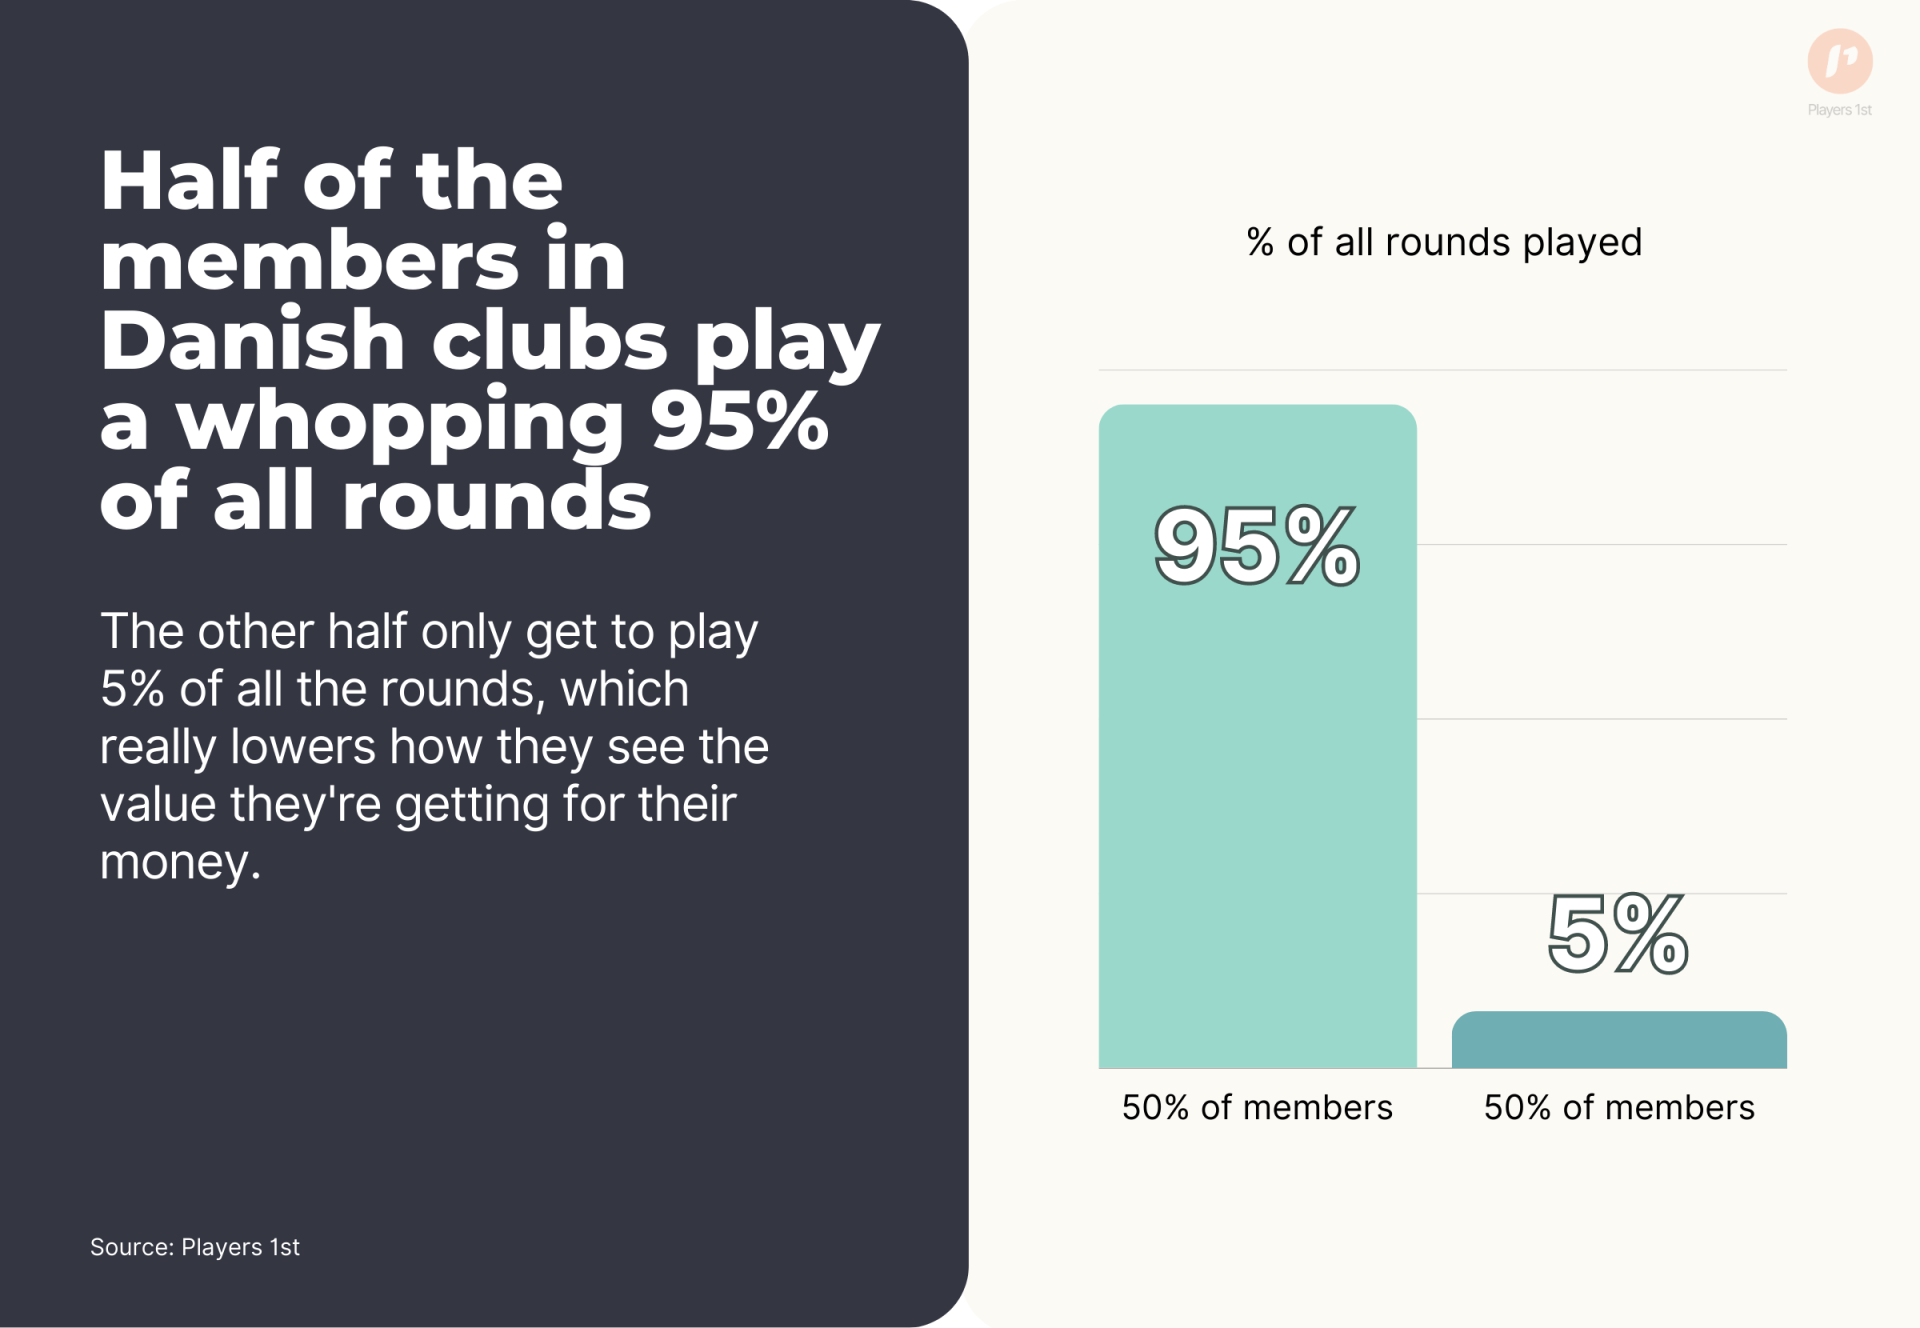 Half of the members in Danish clubs play a whopping 95% of all rounds.